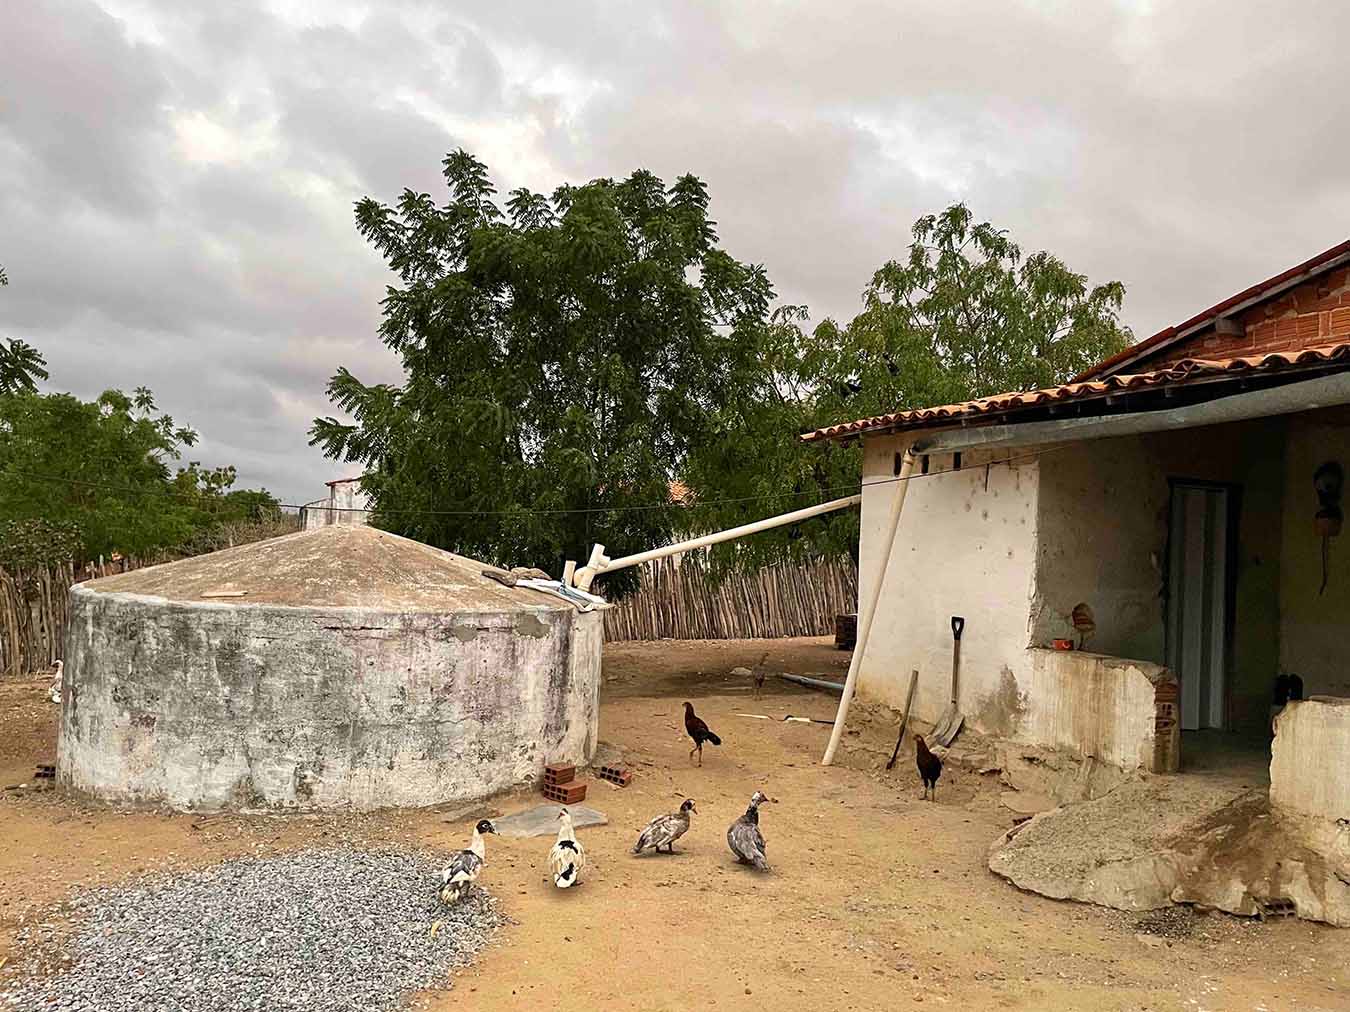 A worn rain-harvesting cistern on the left is connected to the rooftop of a house via a white pipe. The cistern is cylindrical with a cone top. It is white and gray and shows signs of wear. Chickens and ducks walk around in front of the cistern.